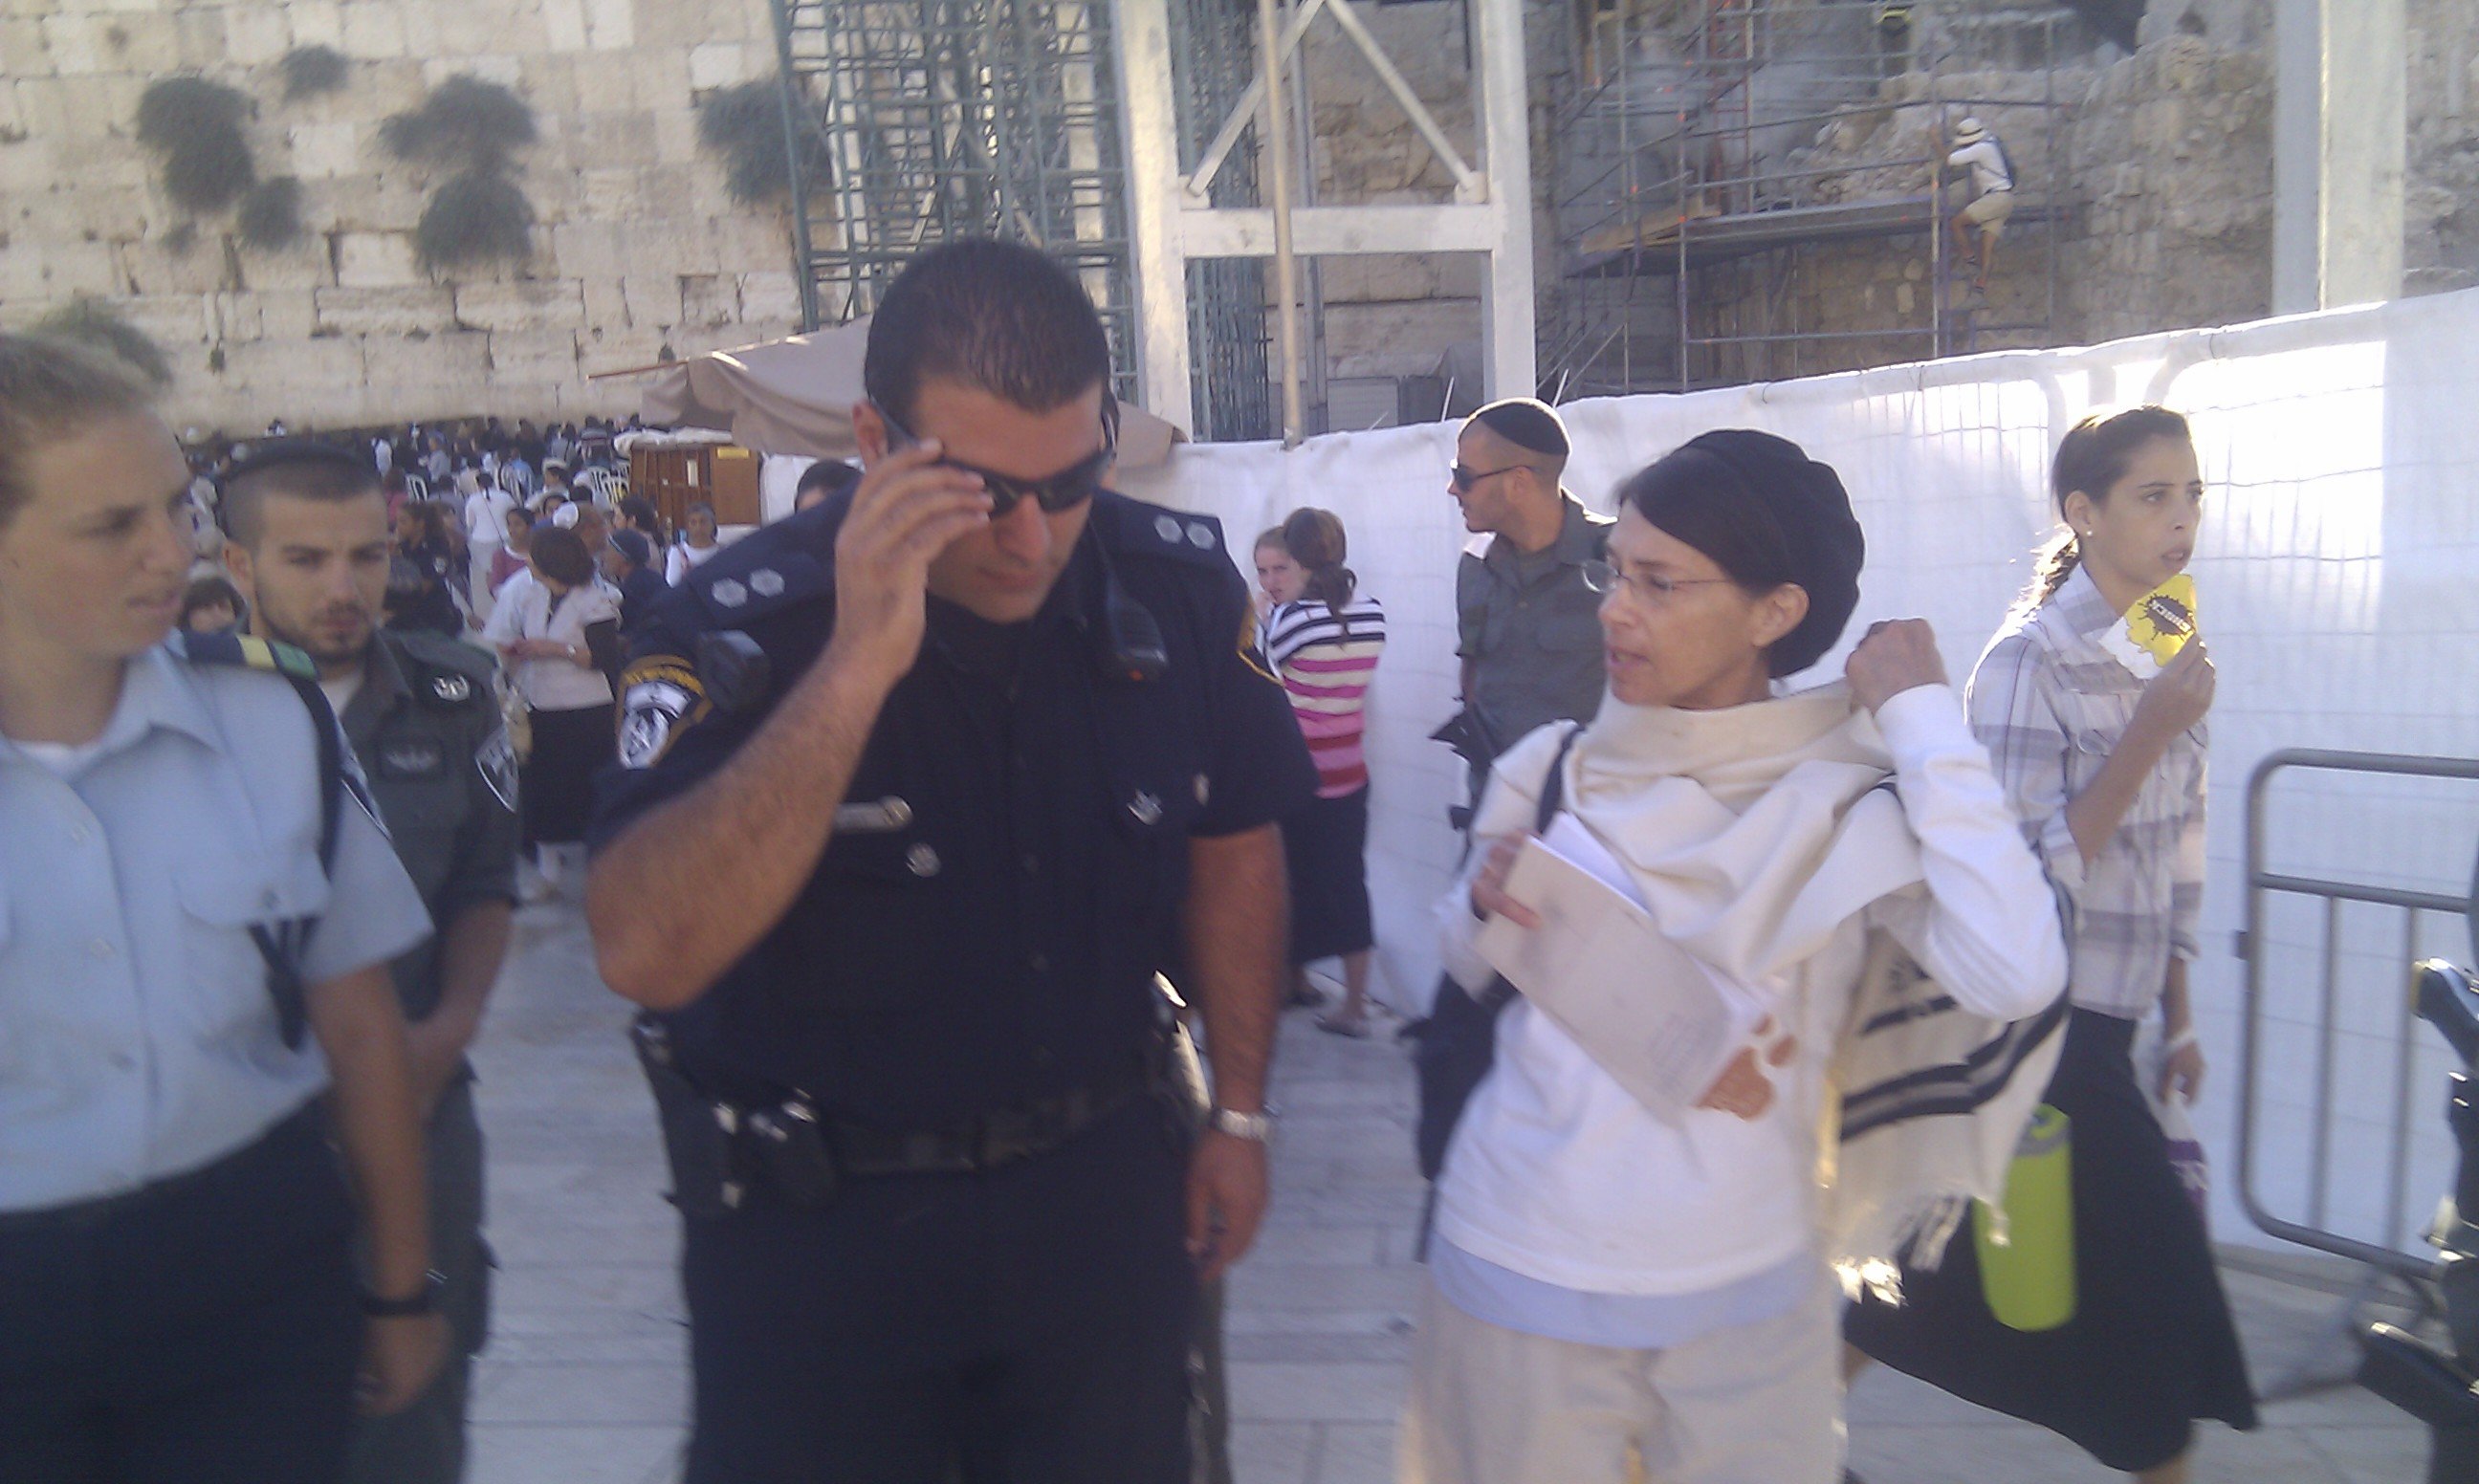 Being arrested at the Western Wall